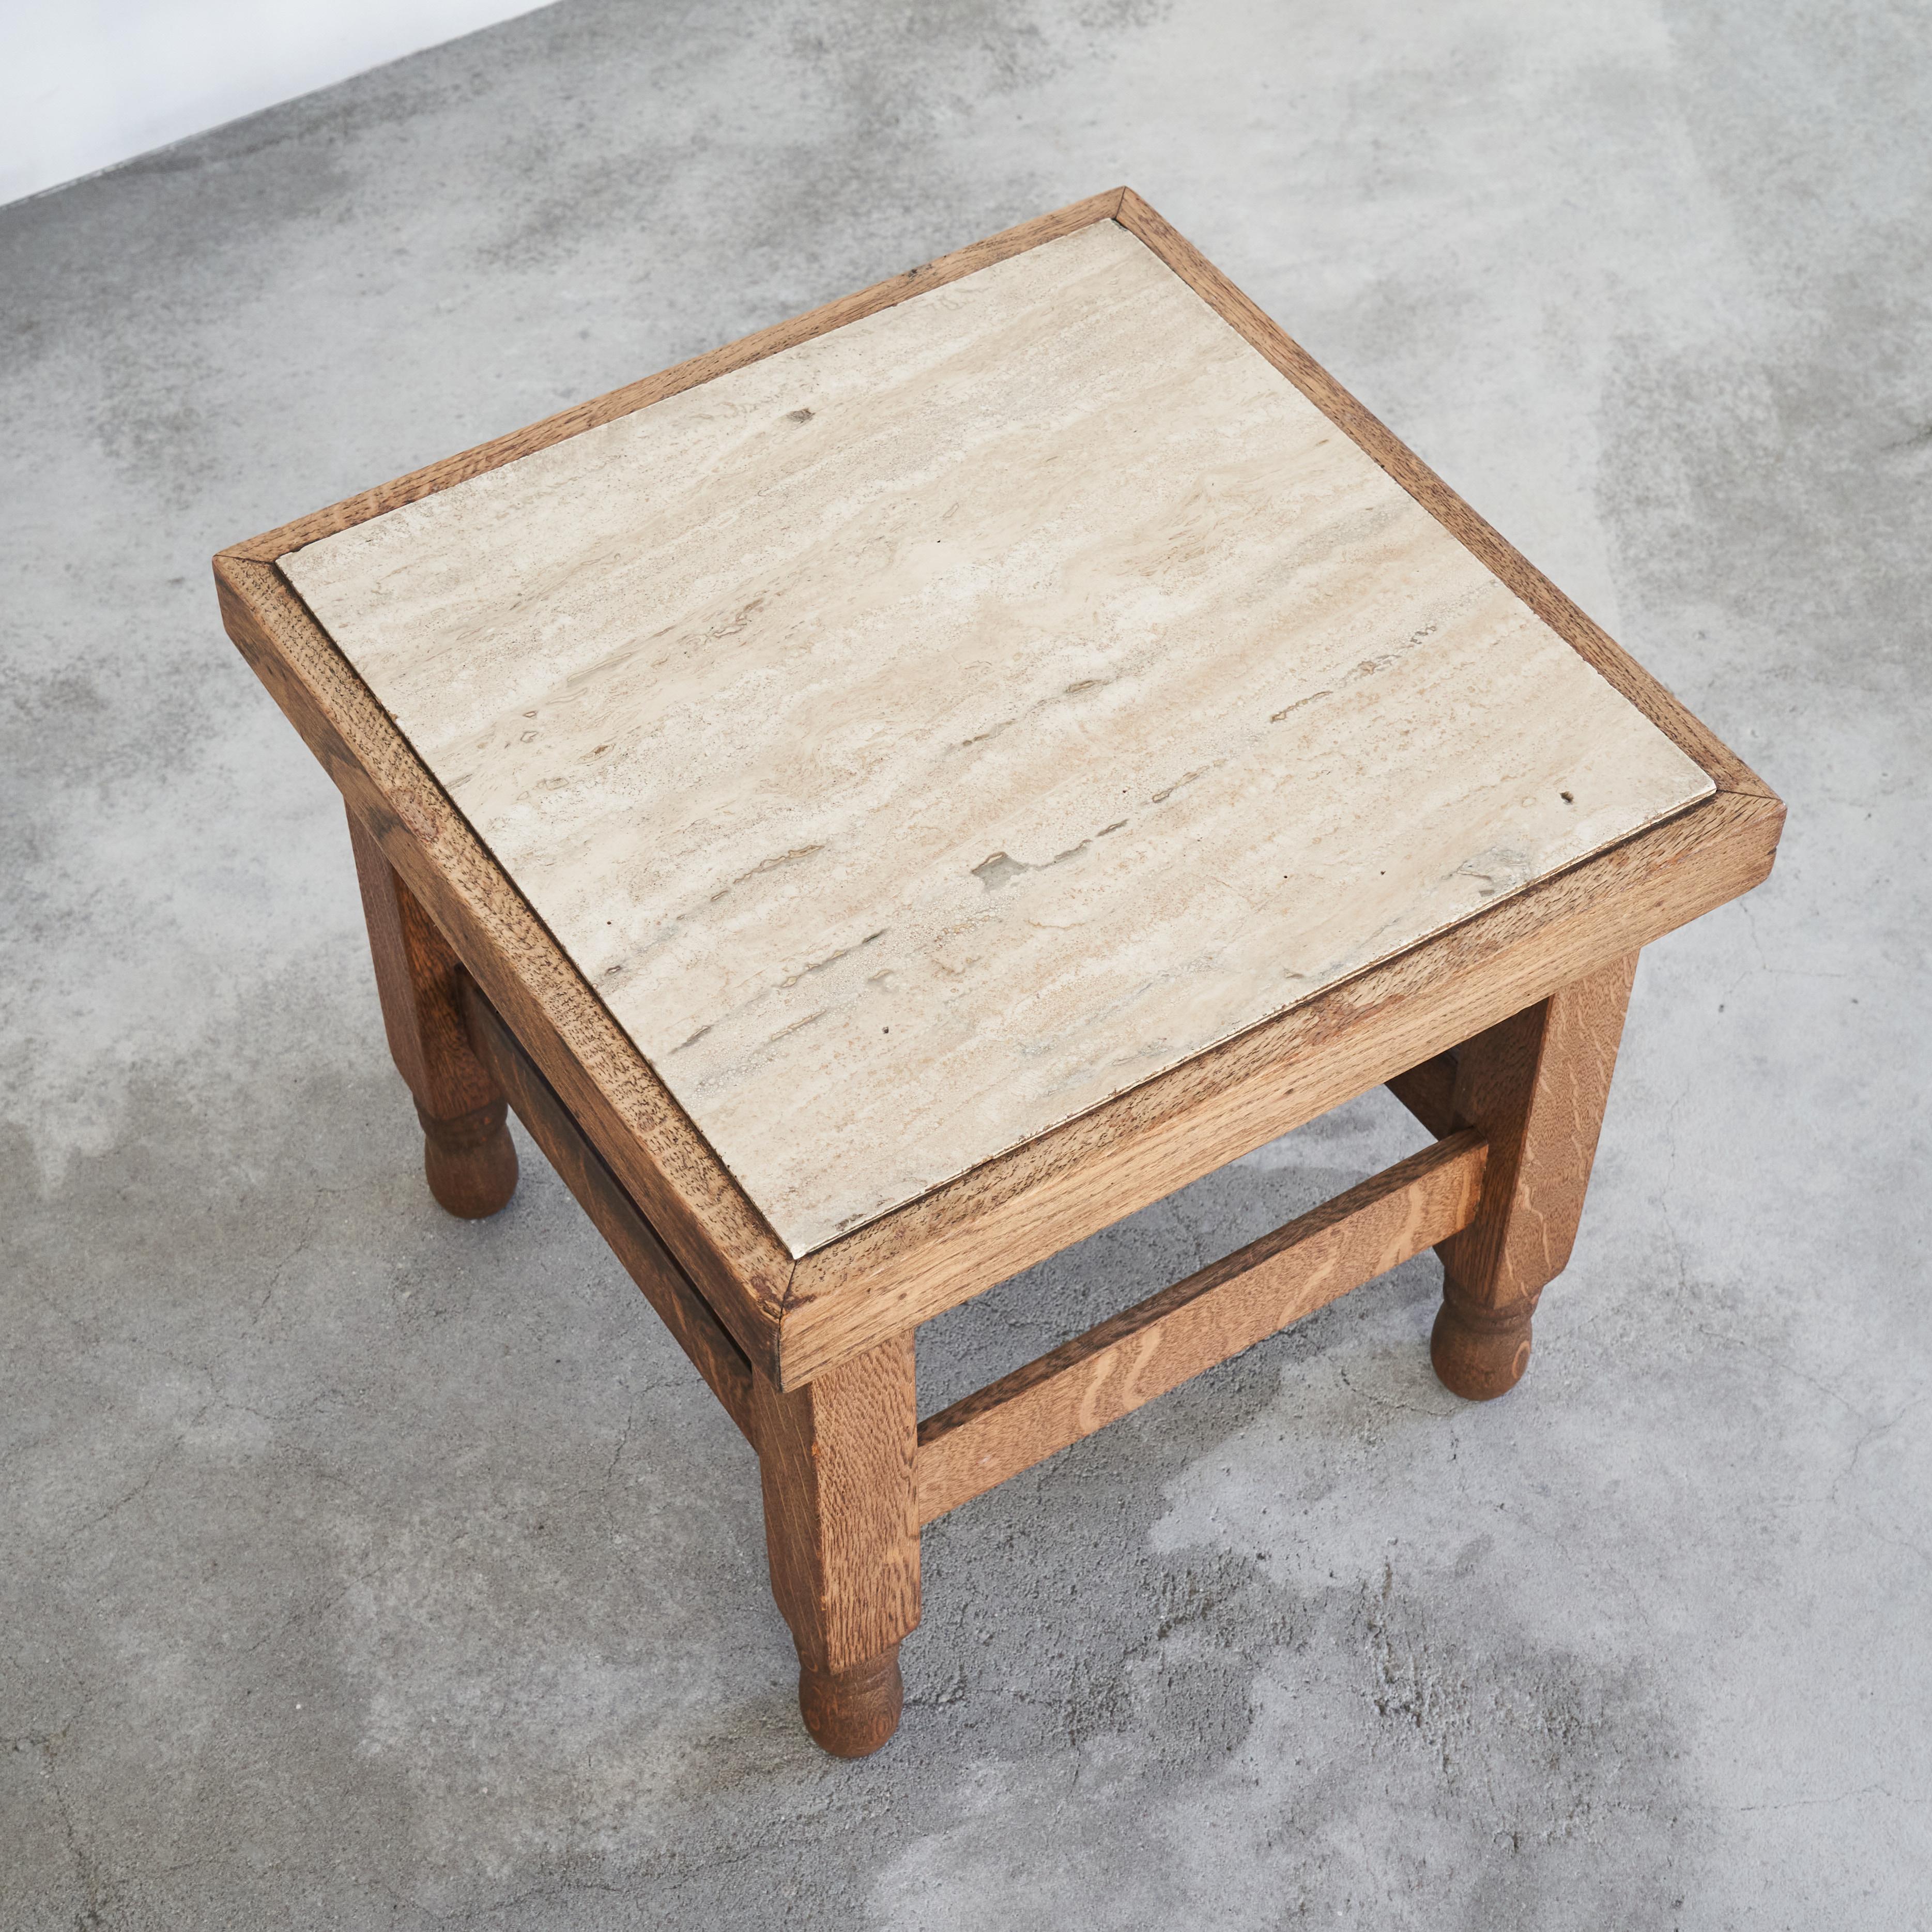 European Art Deco Side Table in Solid Oak and Travertine 1930s For Sale